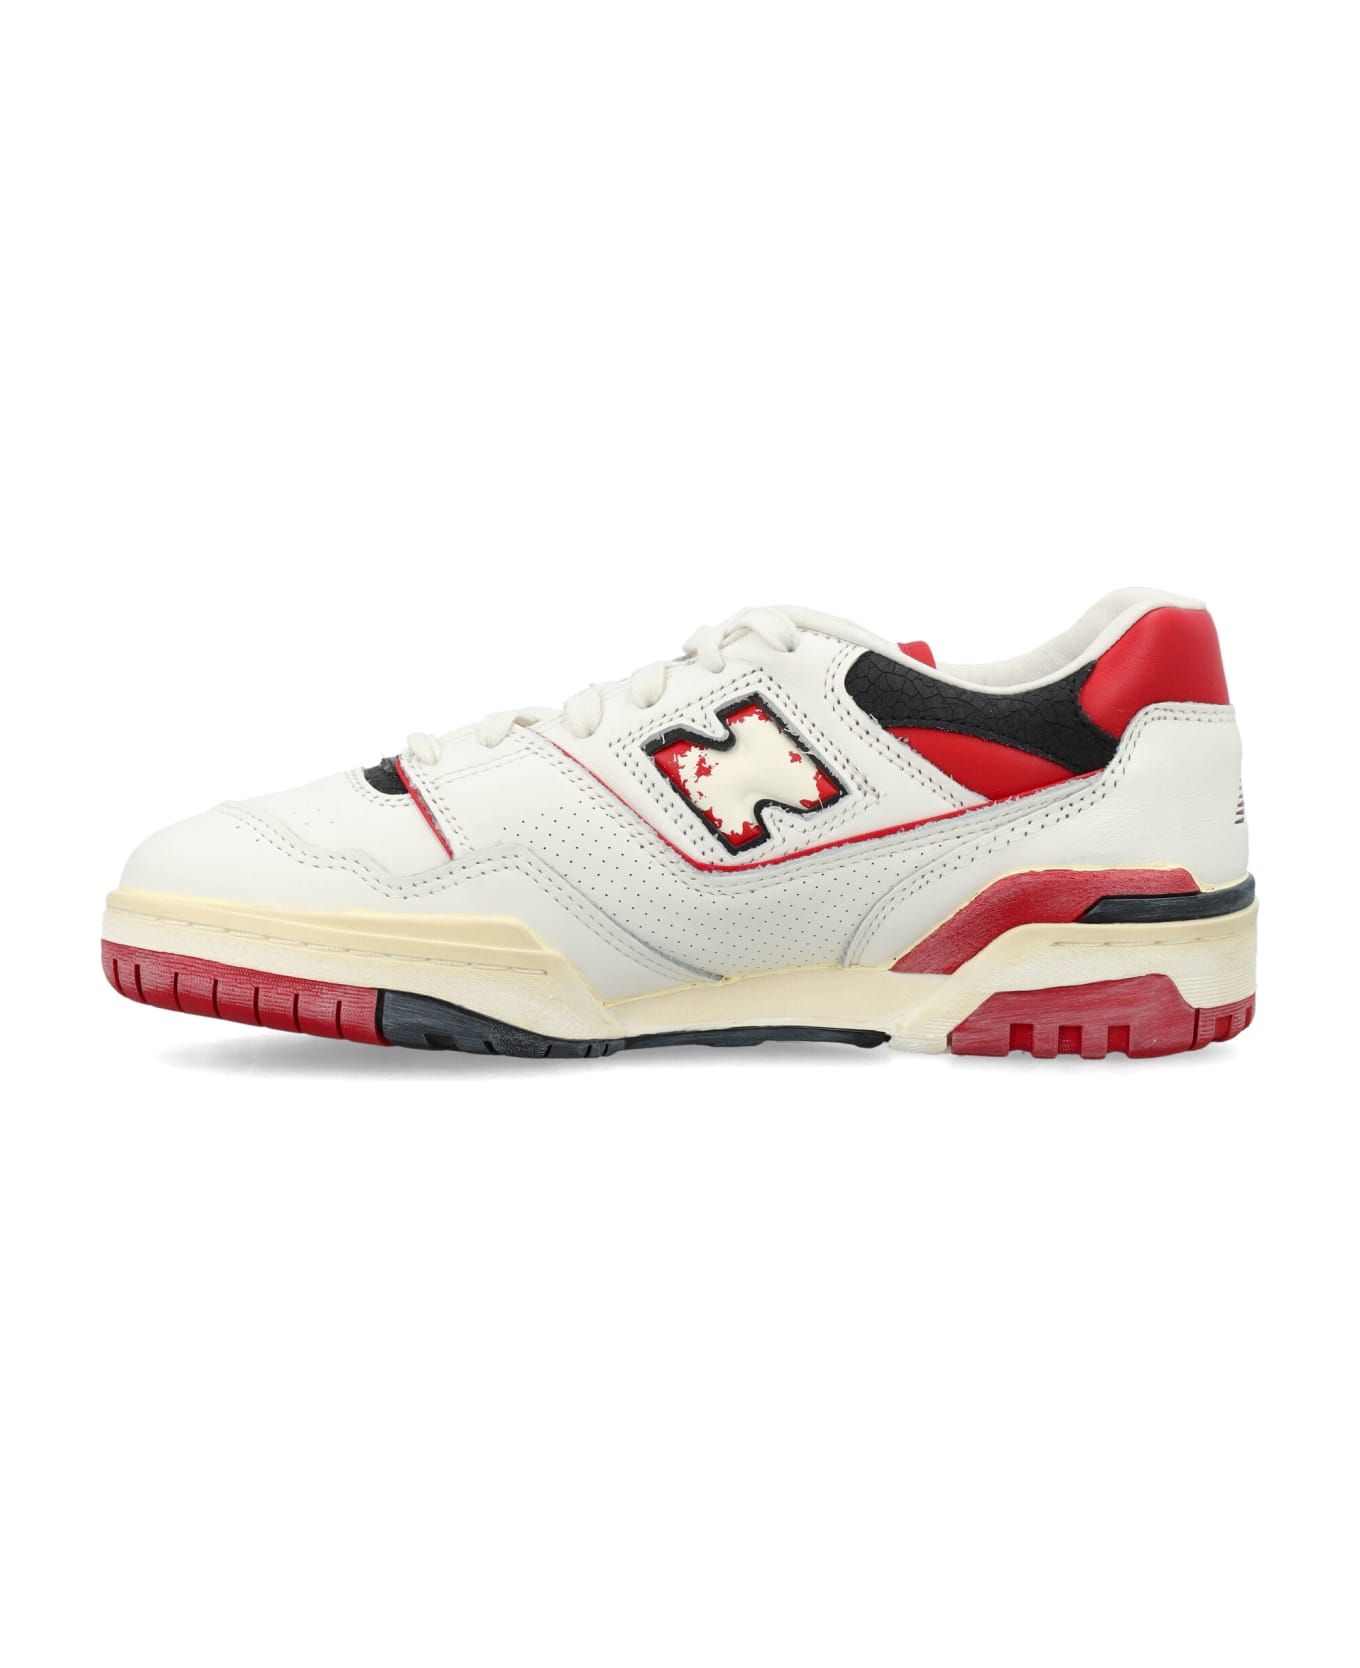 New Balance 550 Sneakers - WHITE RED